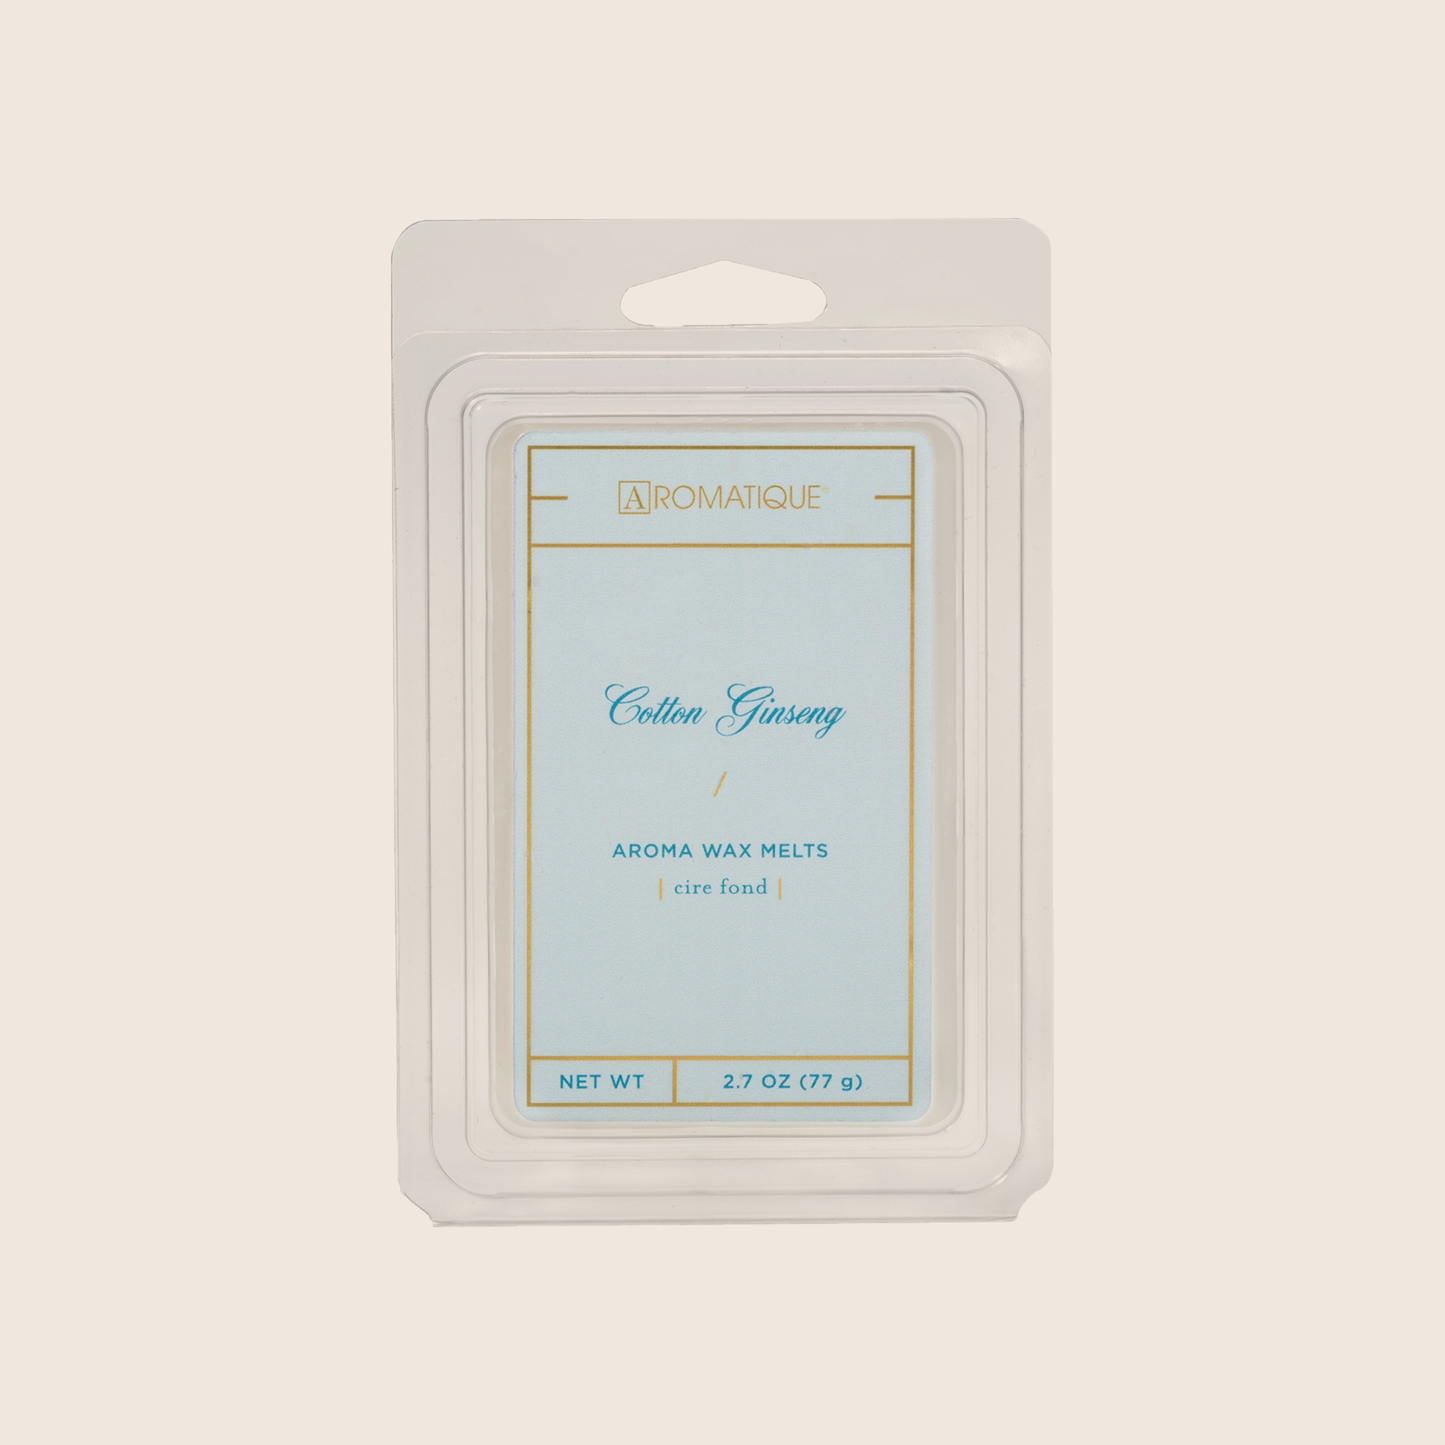 Cotton Ginseng is fresh and light, with notes of cotton blended with jasmine, eucalyptus, and lavender florals enveloped with sandalwood and musk. Cotton Ginseng Aroma Wax Melts contain a set of 8 cubes made from 100% food-grade paraffin wax and a highly fragrant aroma - no wicks or flames needed.